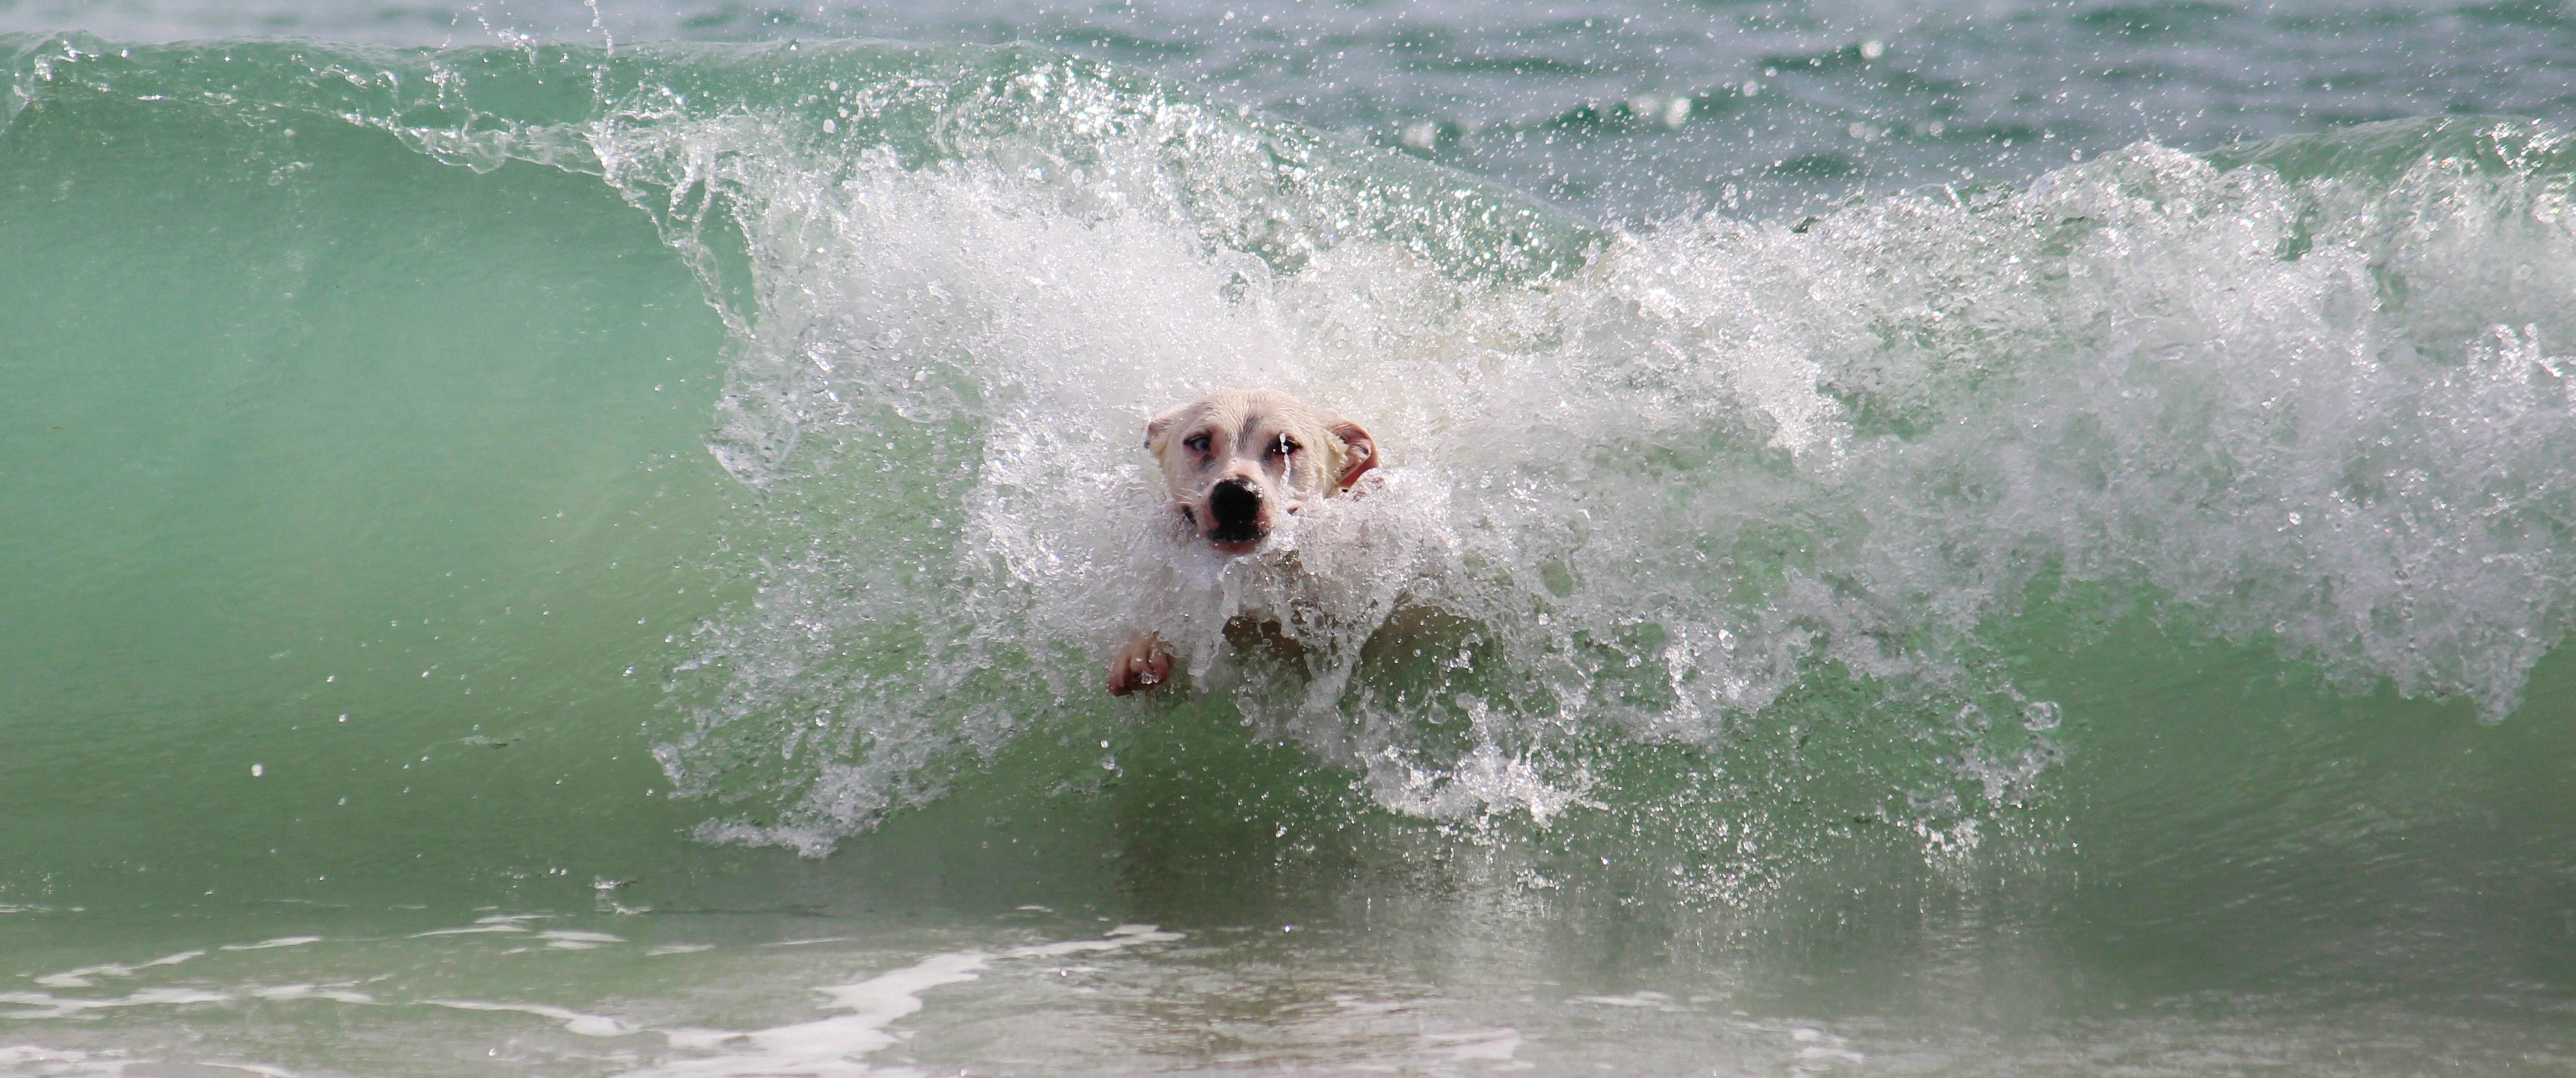 Wet, Beach, Water, Play, Surf, Wave, Dog, dog, pets